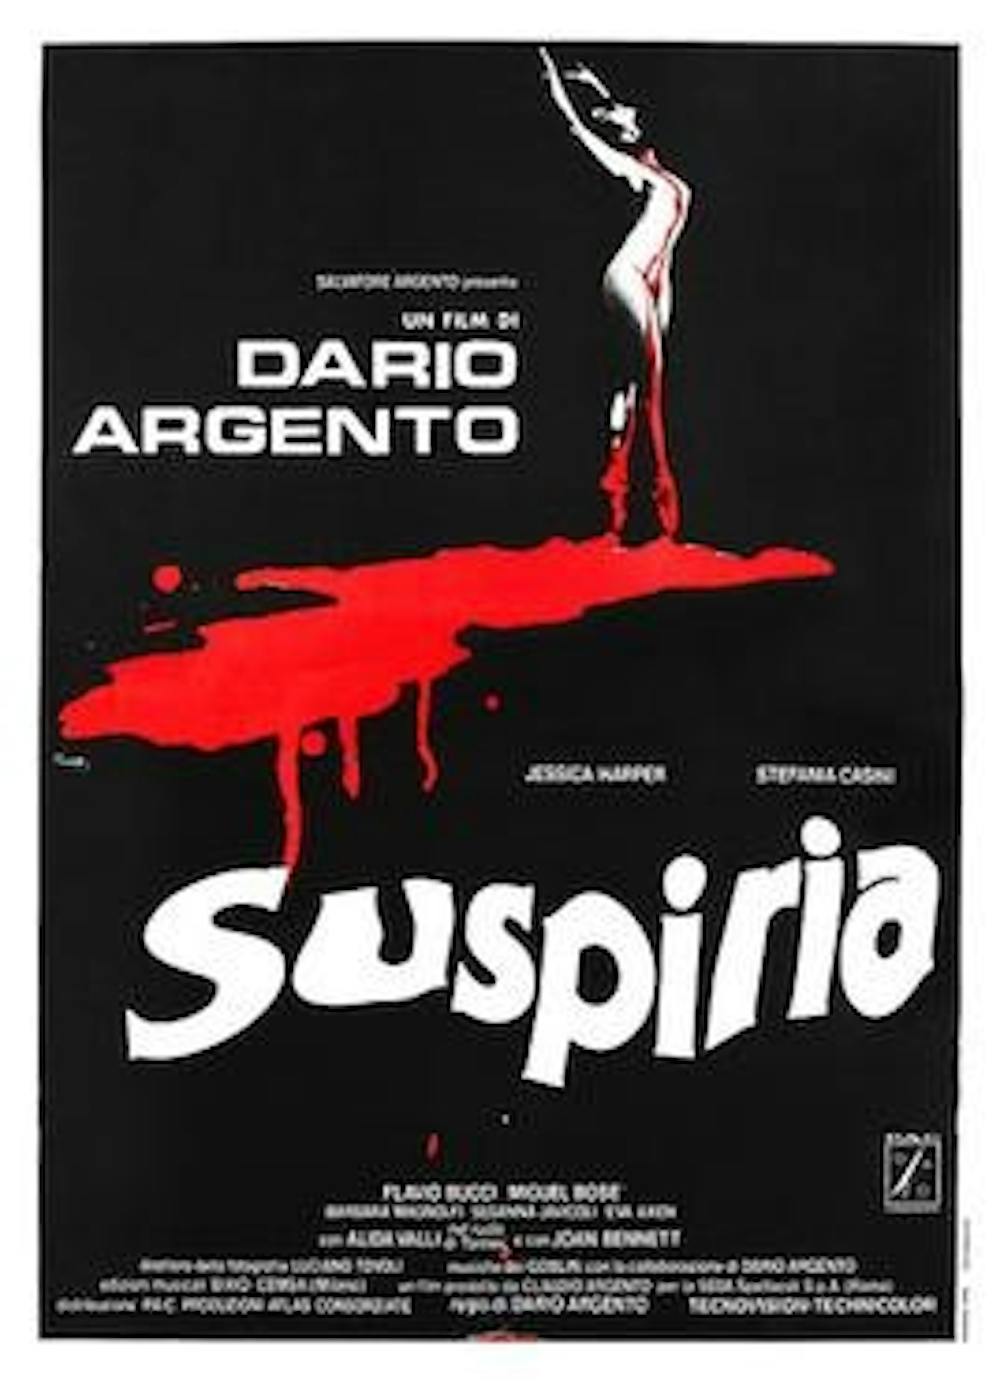 <p>The overlooked 1977 horror classic "Suspiria" is the inspiration behind the 2018 remake, and this spooky source material deserves attention from any scary movie fans.</p>